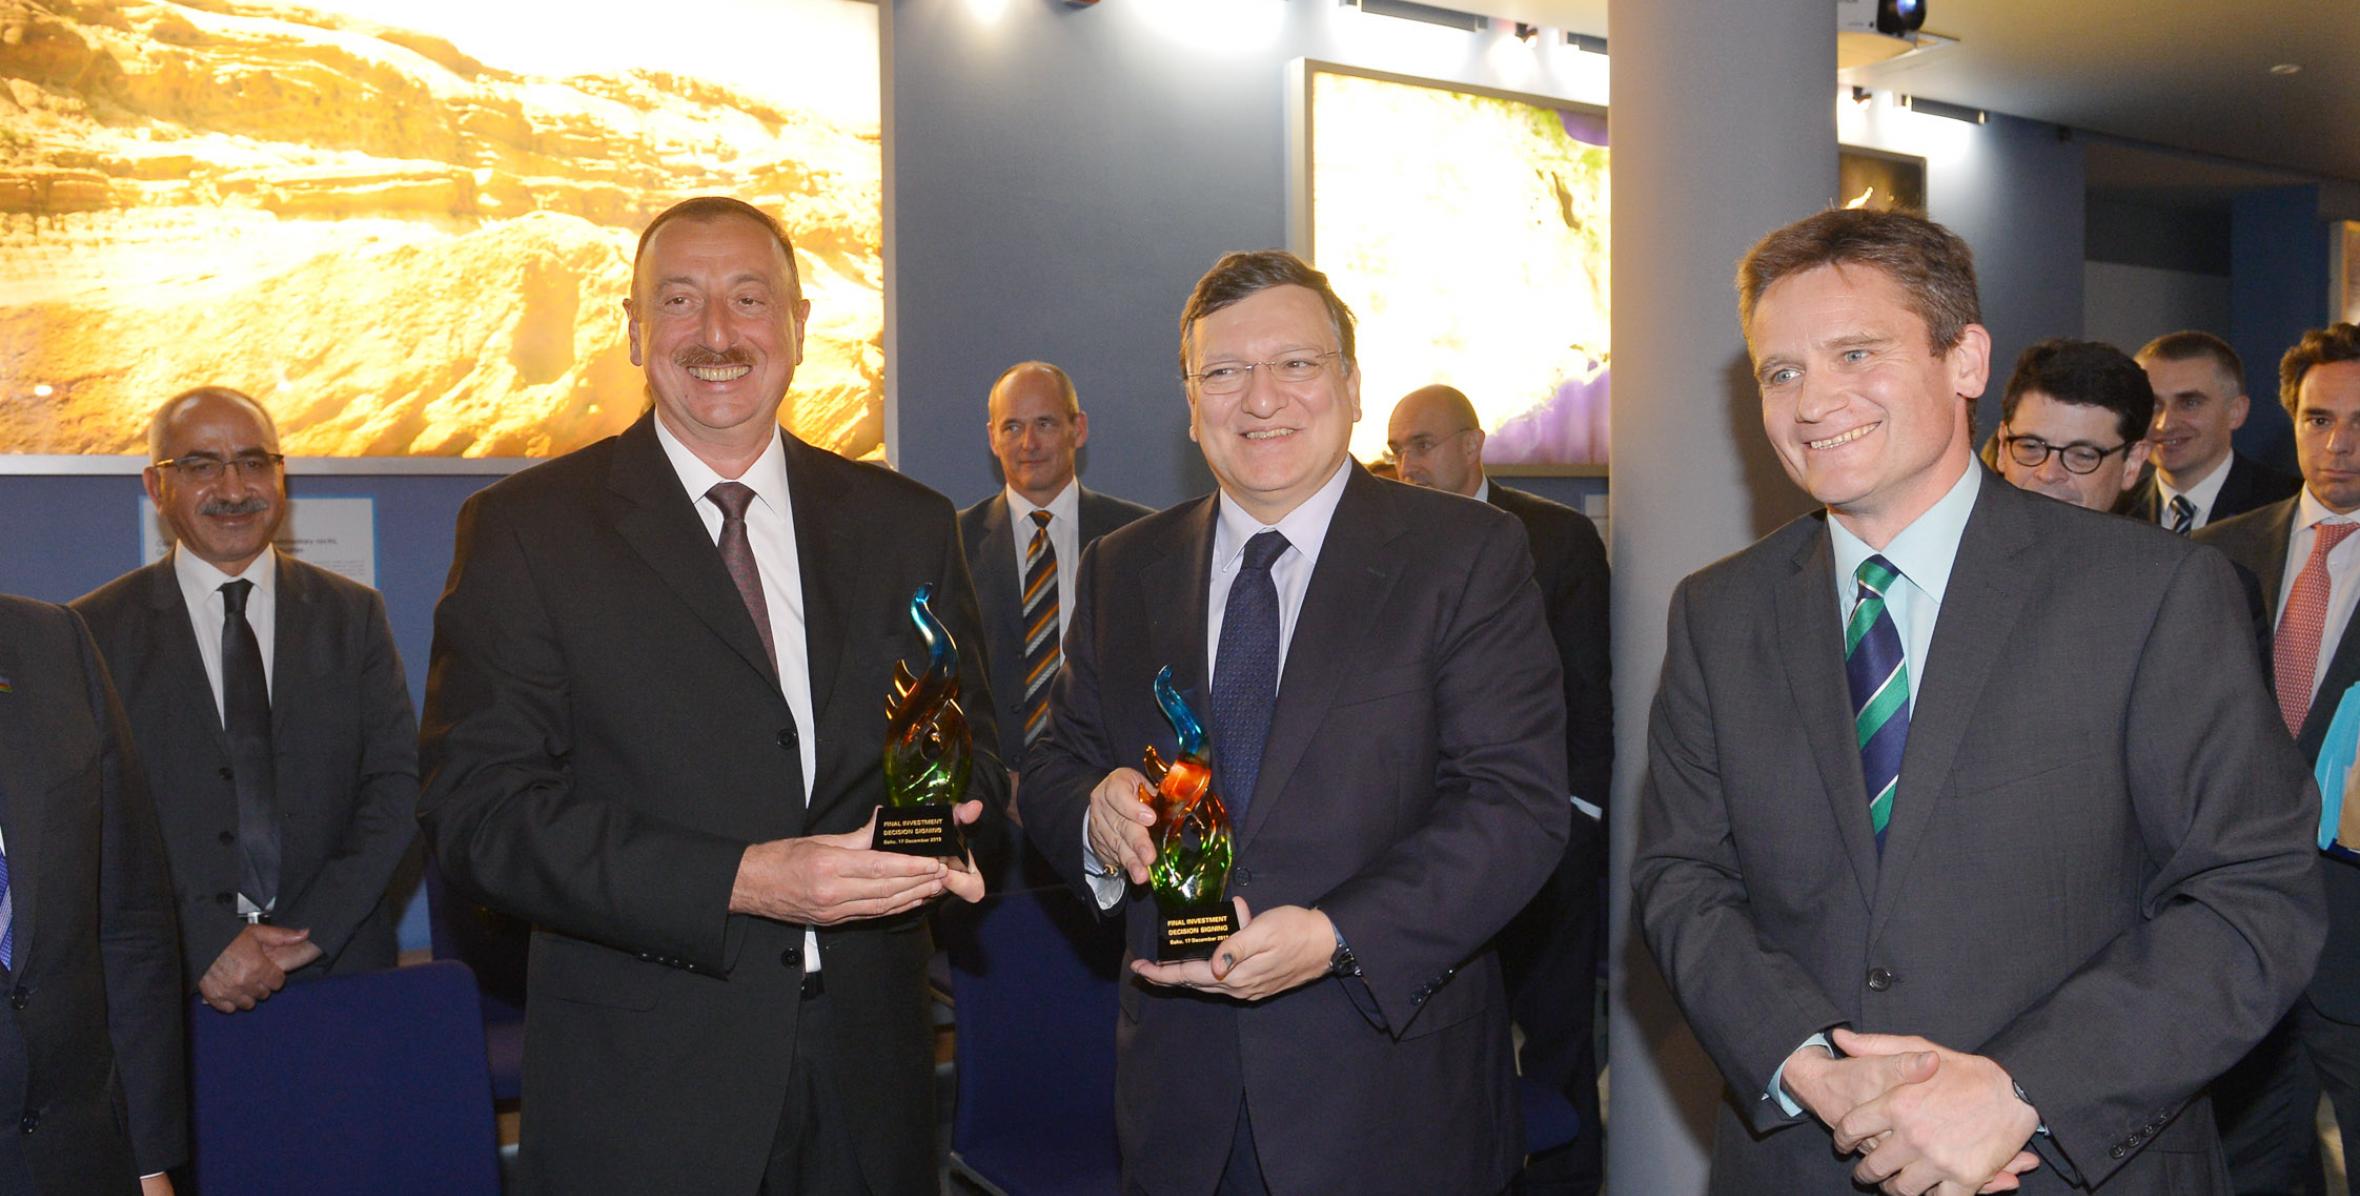 Ilham Aliyev and President of the European Commission Jose Manuel Barroso visited the Sangachal Terminal